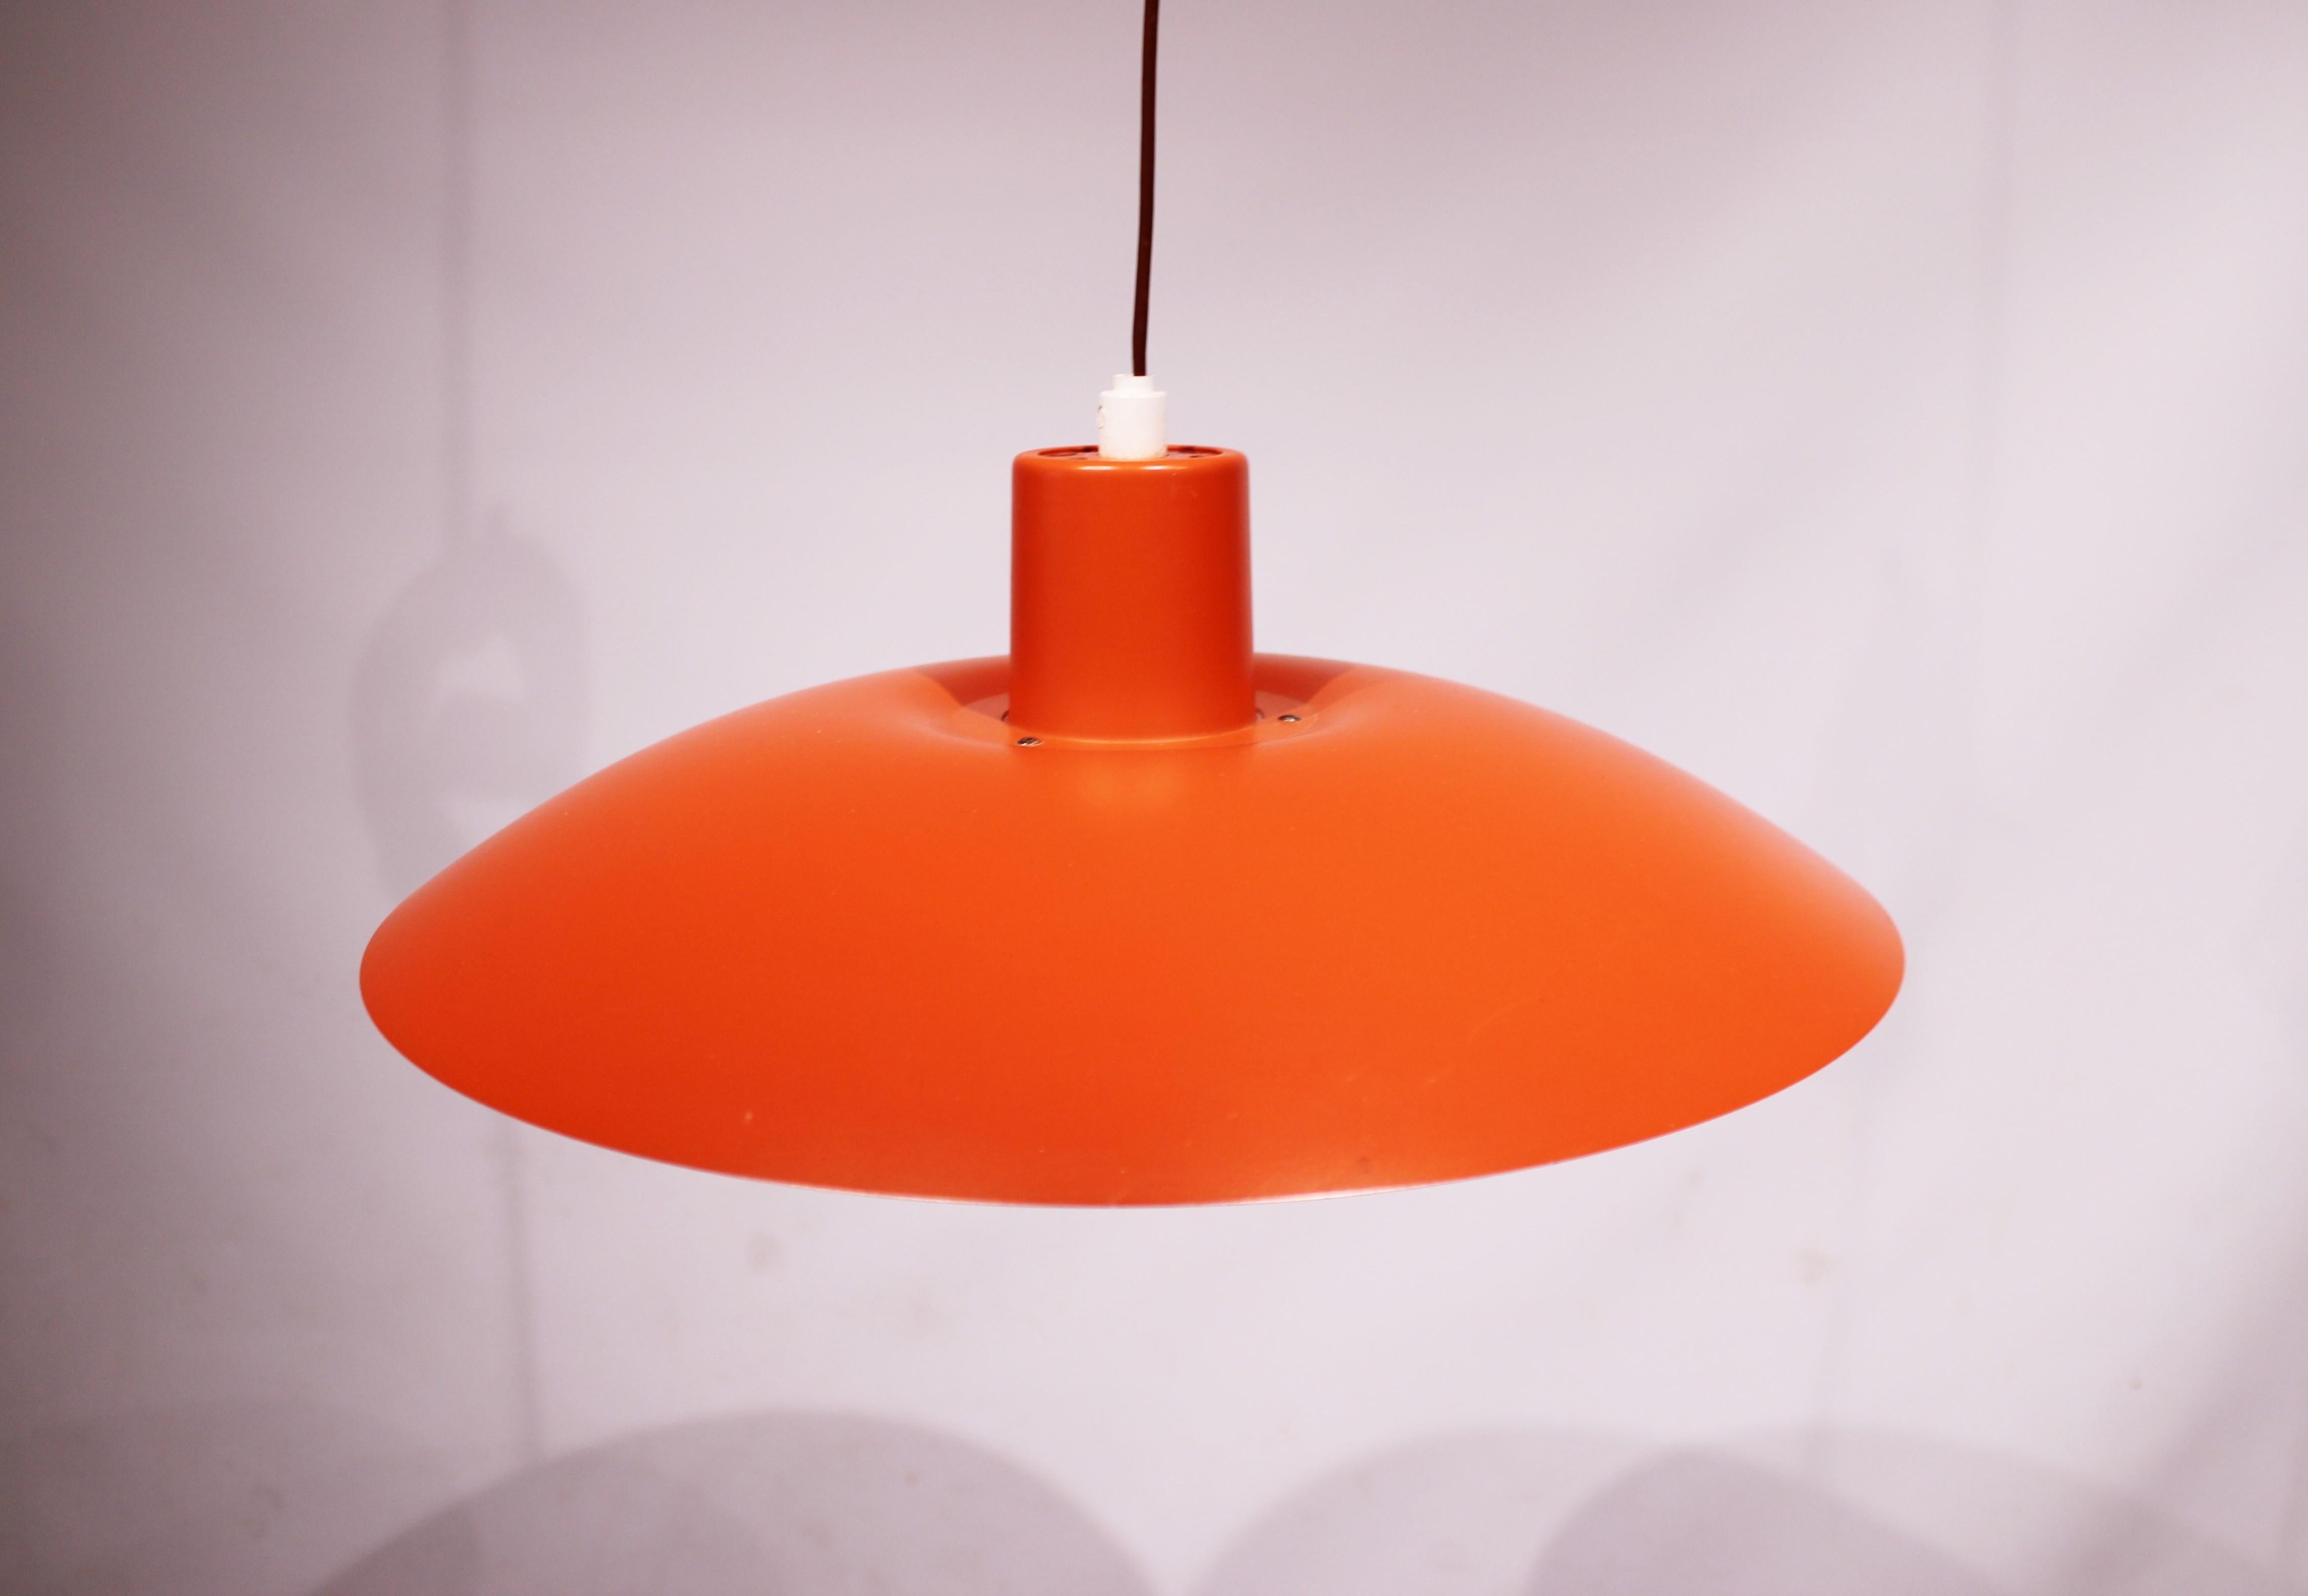 Red PH4 pendant designed by Poul Henningsen and manufactured by Louis Poulsen in the 1970s. The lamp is in great vintage condition.